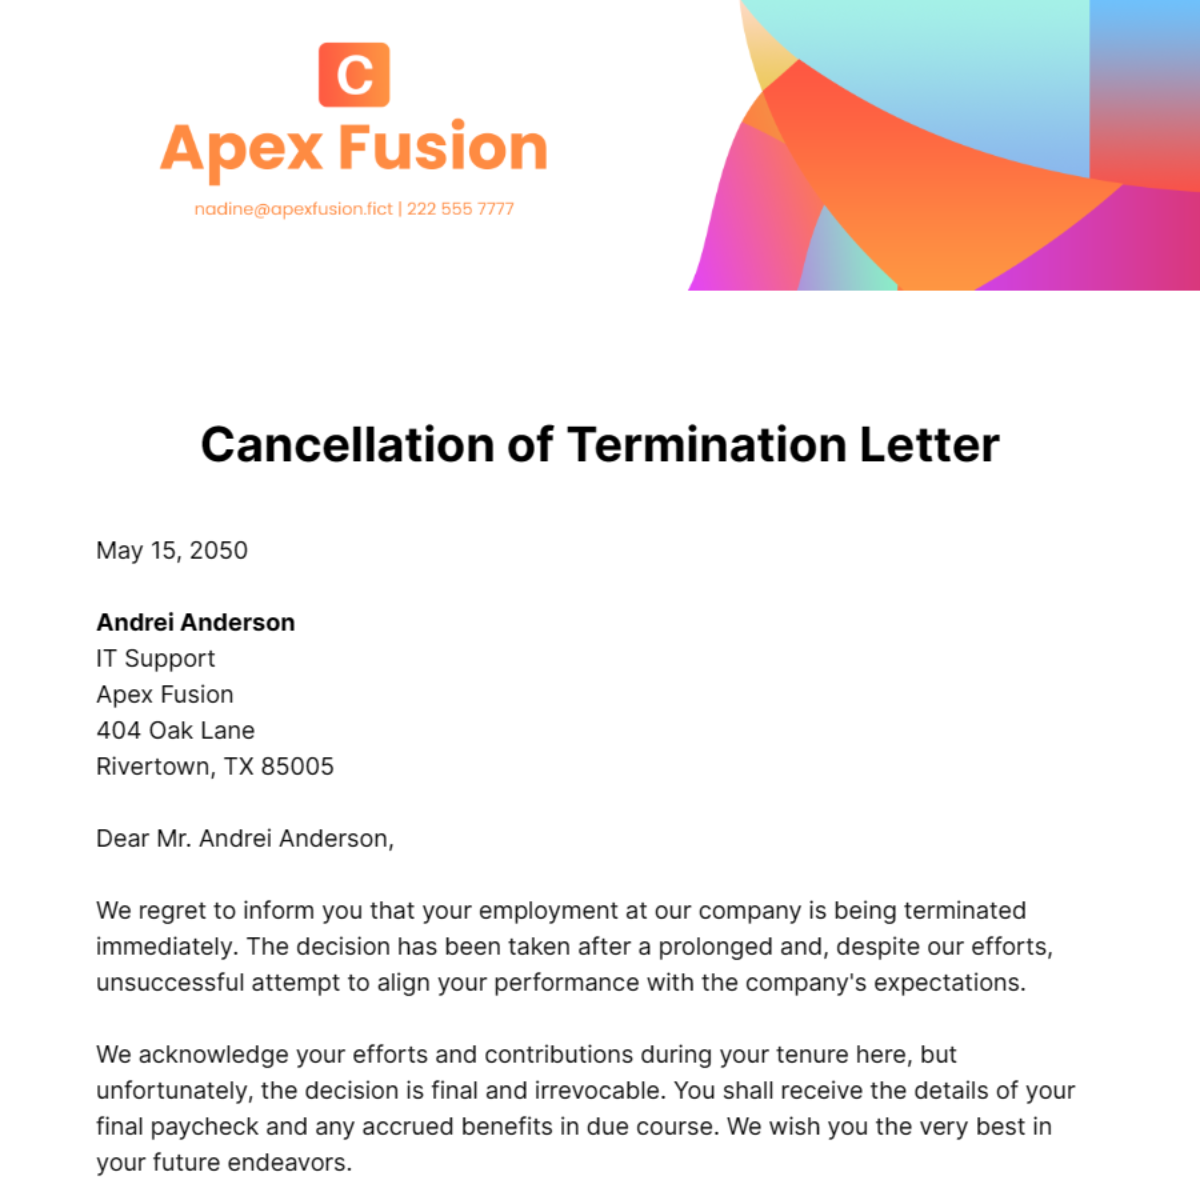 Cancellation of Termination Letter Template